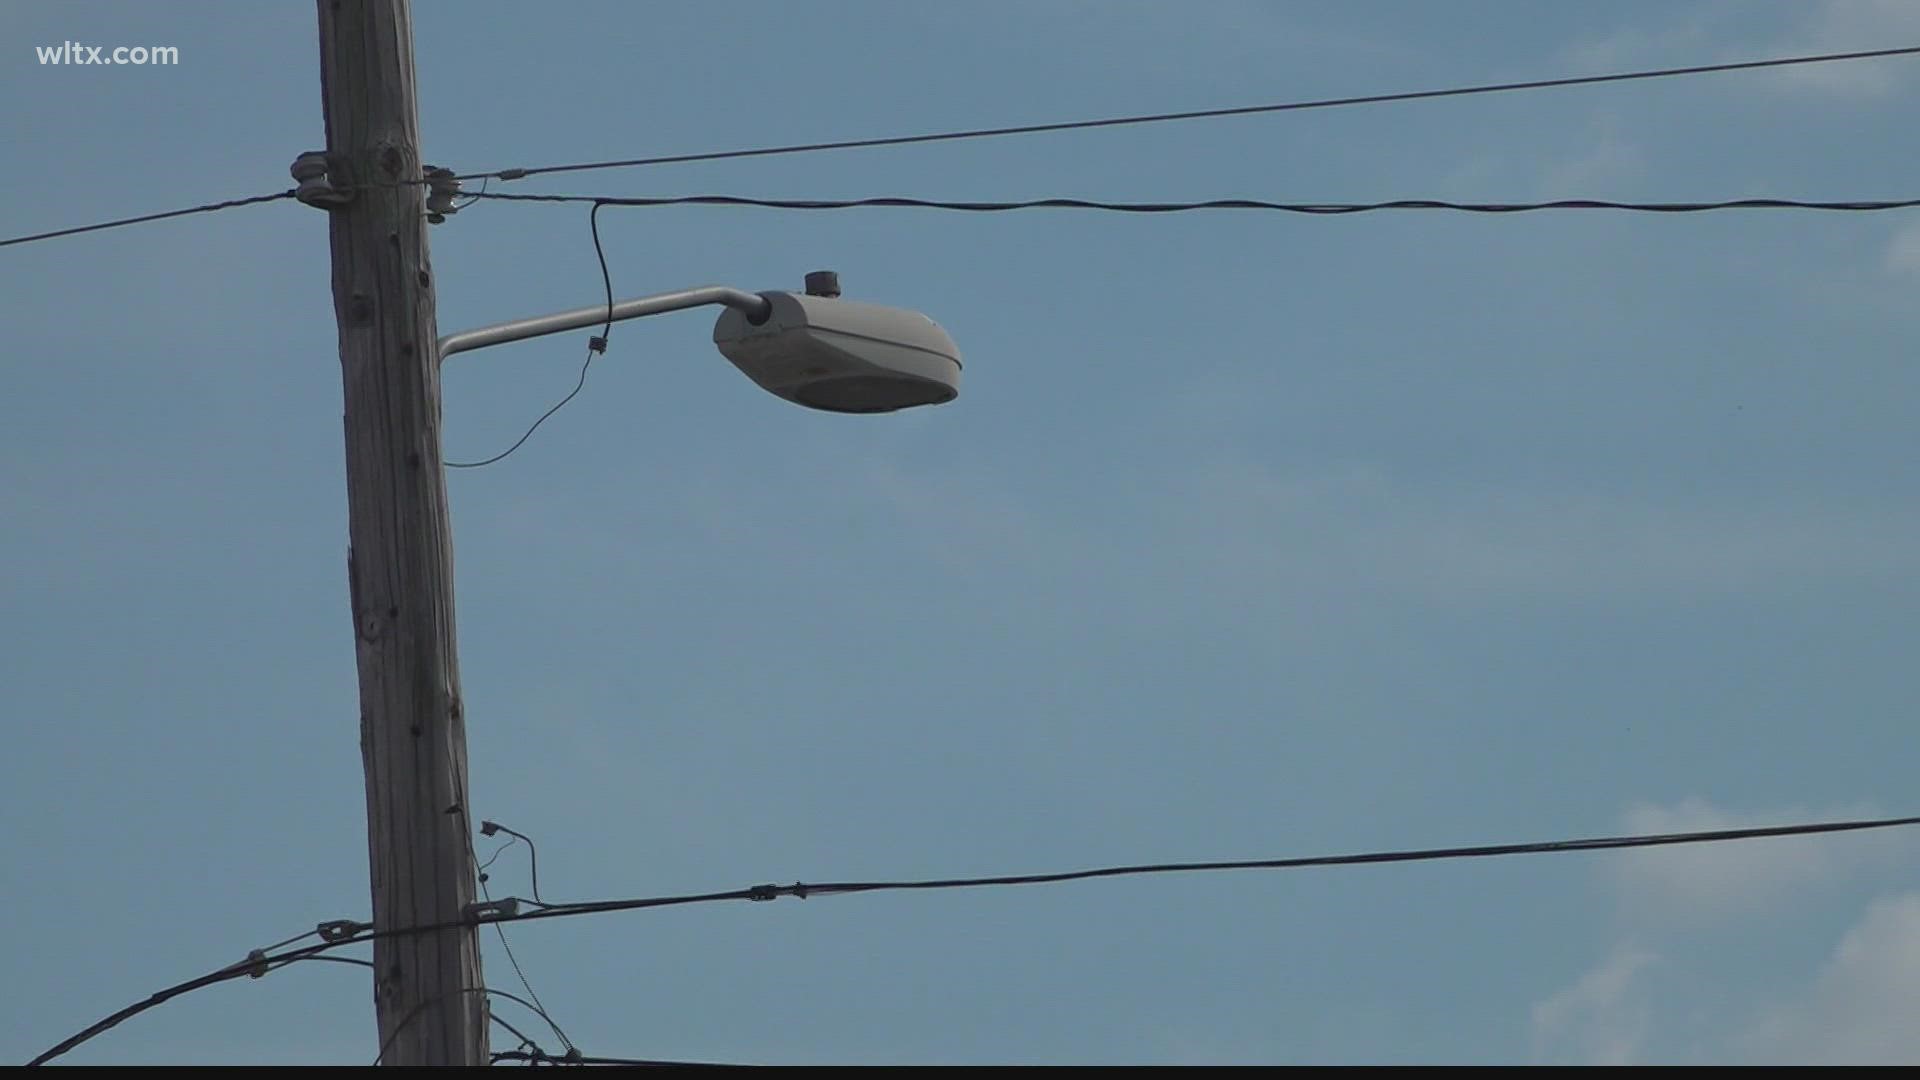 Columbia is hoping to save hundreds of thousands of dollars by switching public lights to LEDs.